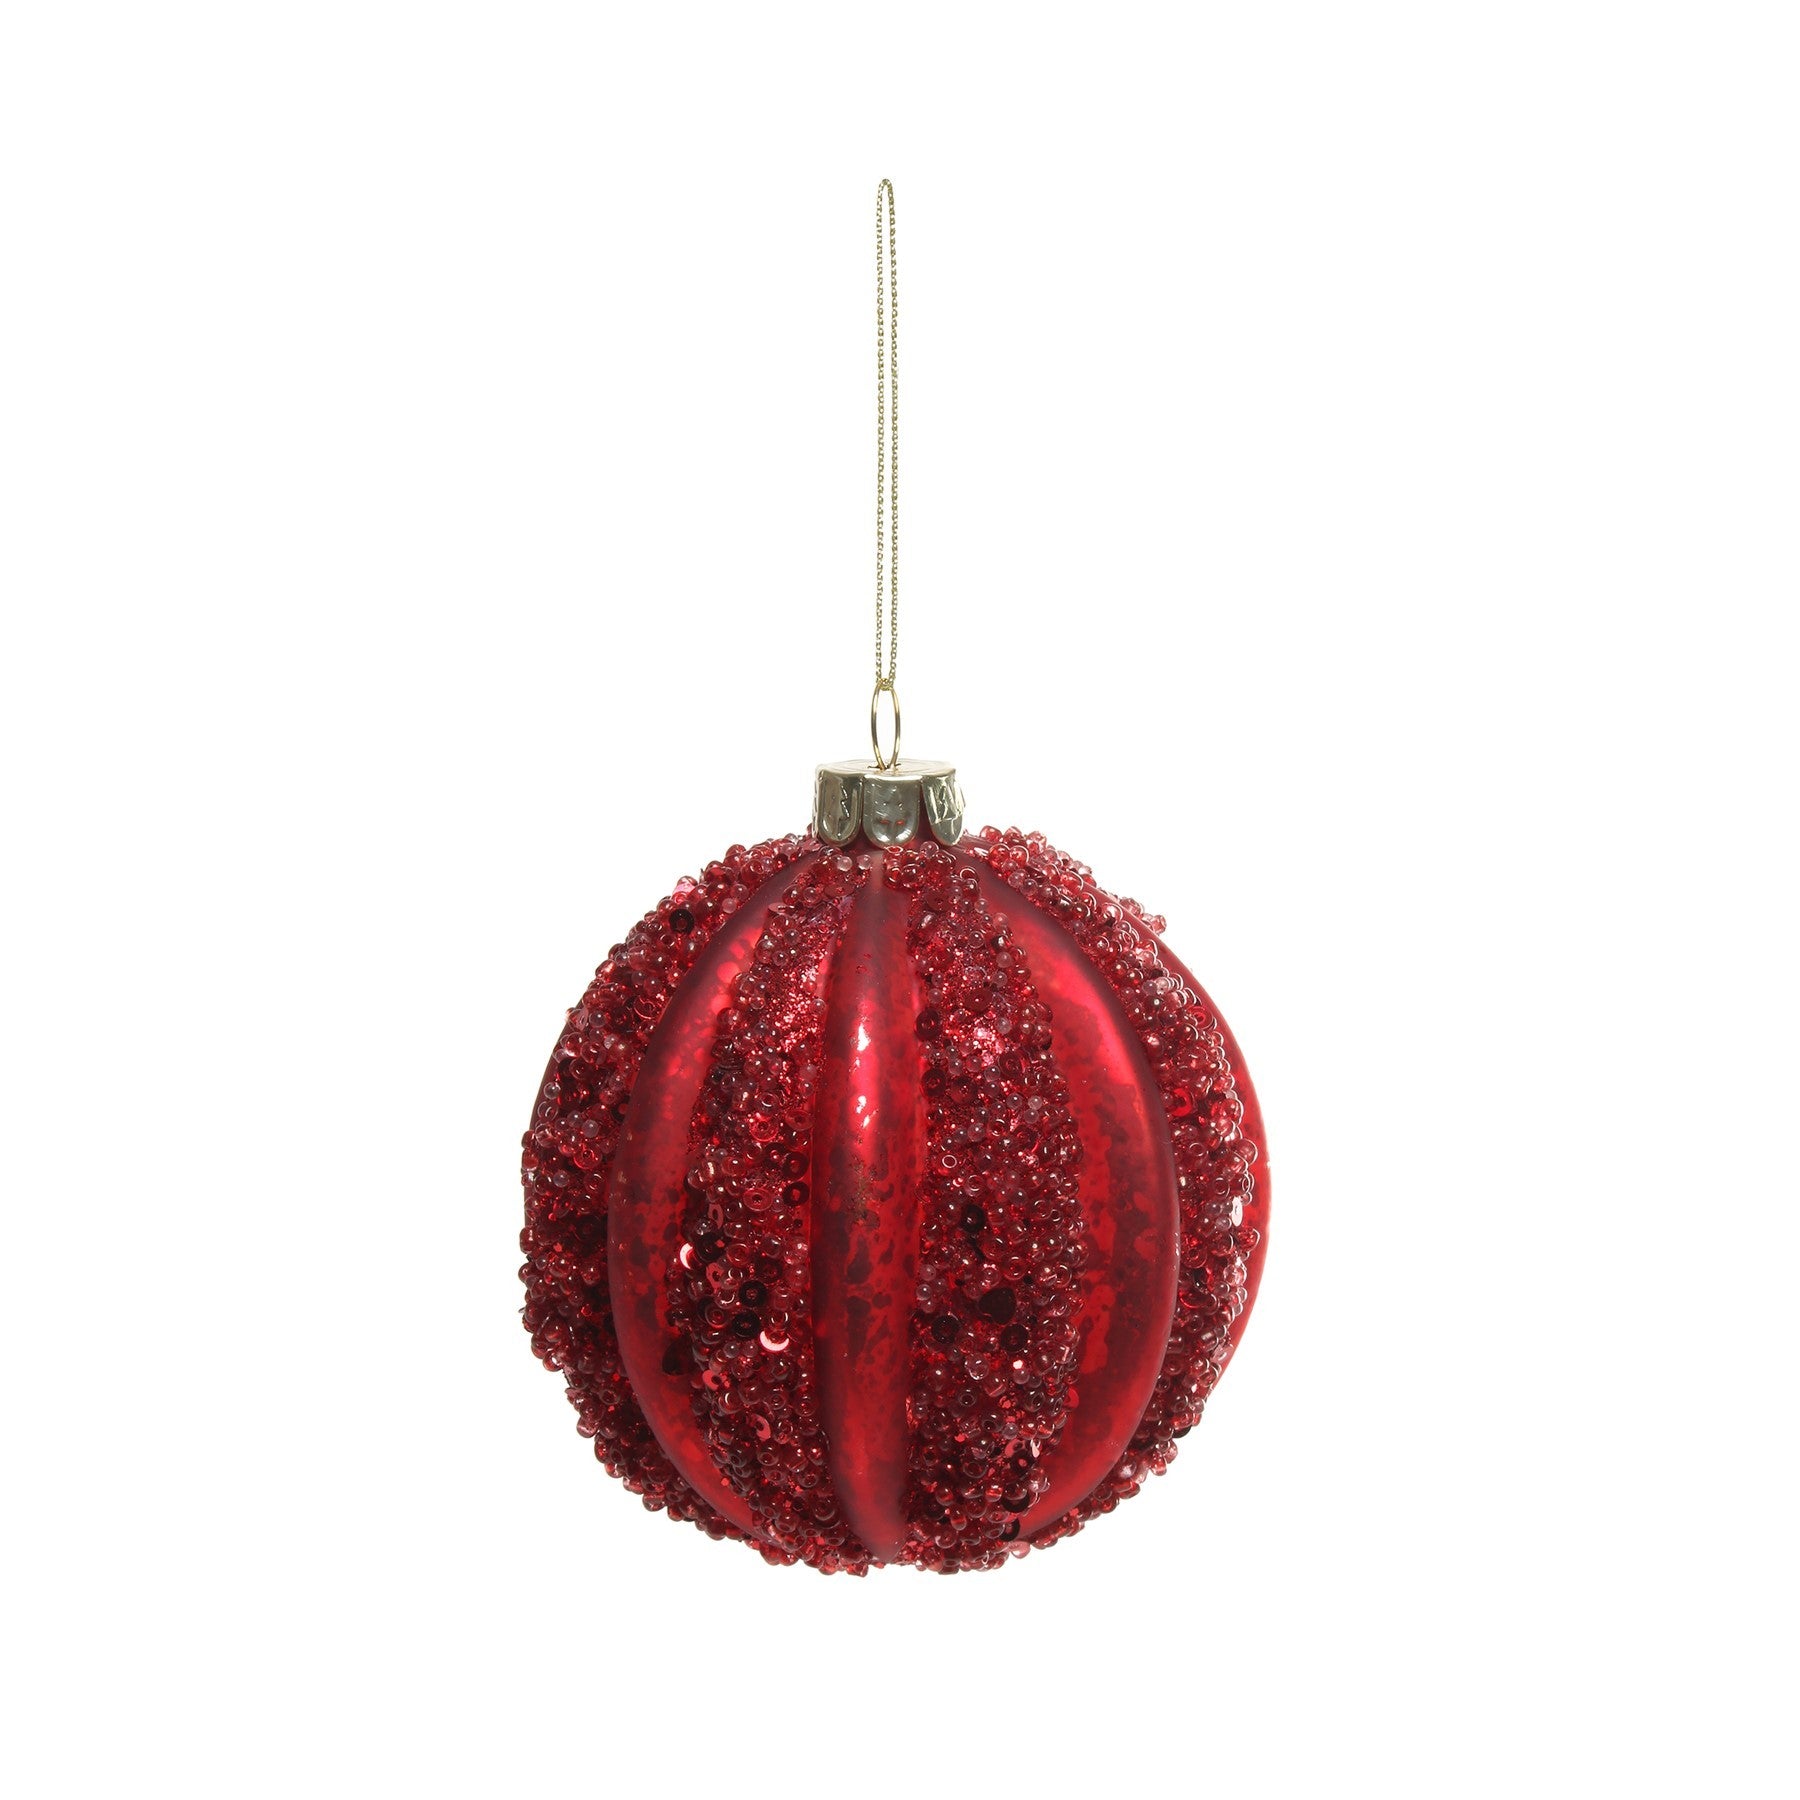 View Red Glass Bauble with Red Band 80mm information